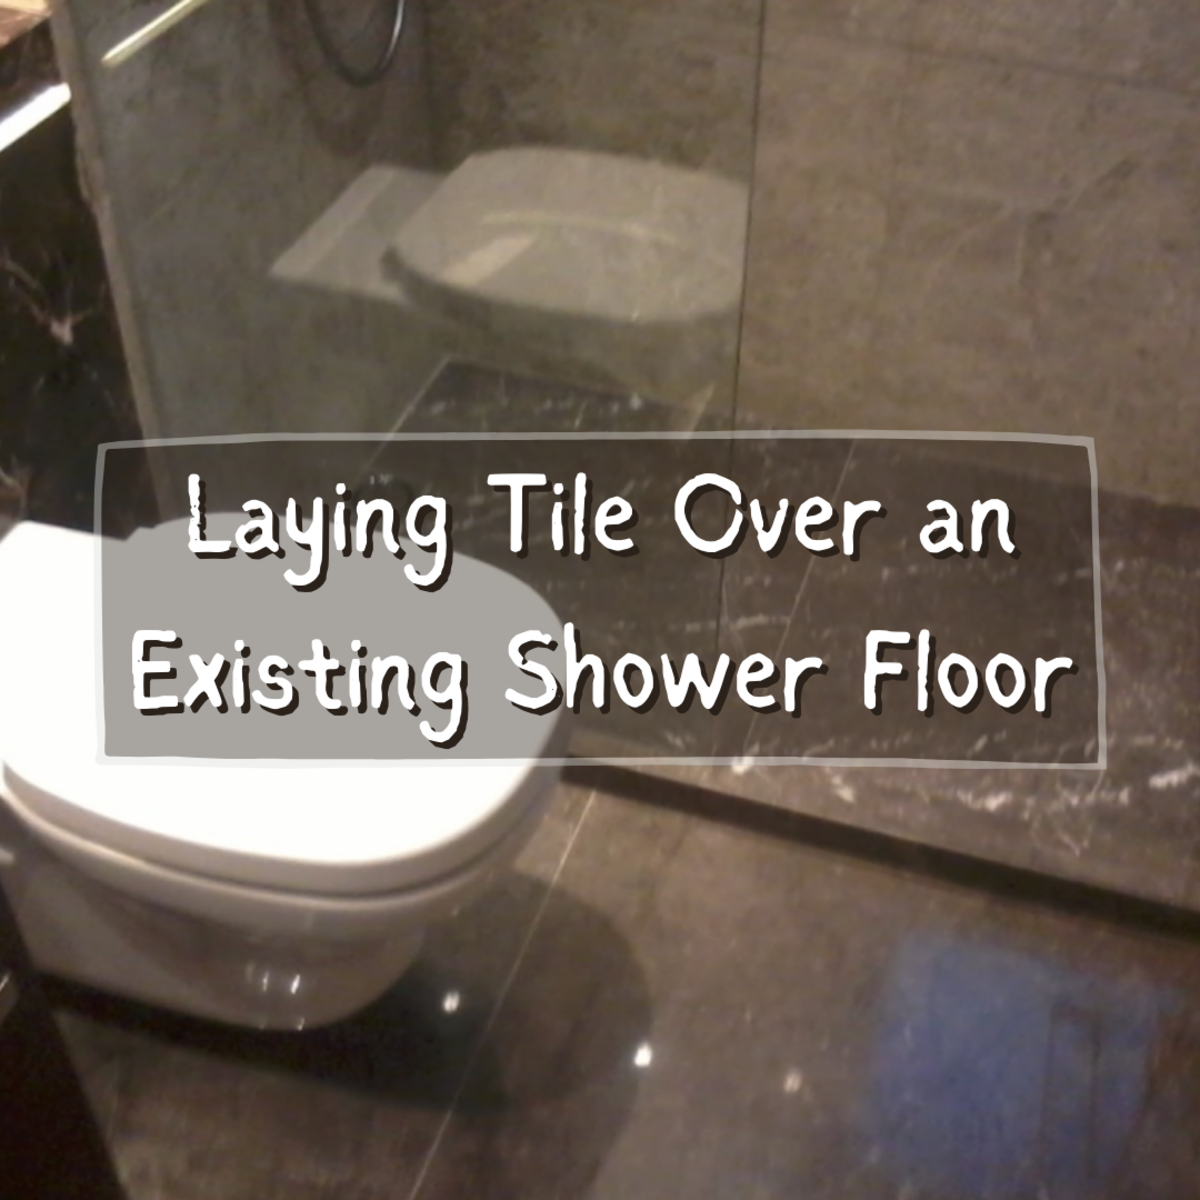 How to Lay Tile Over an Existing Shower Floor